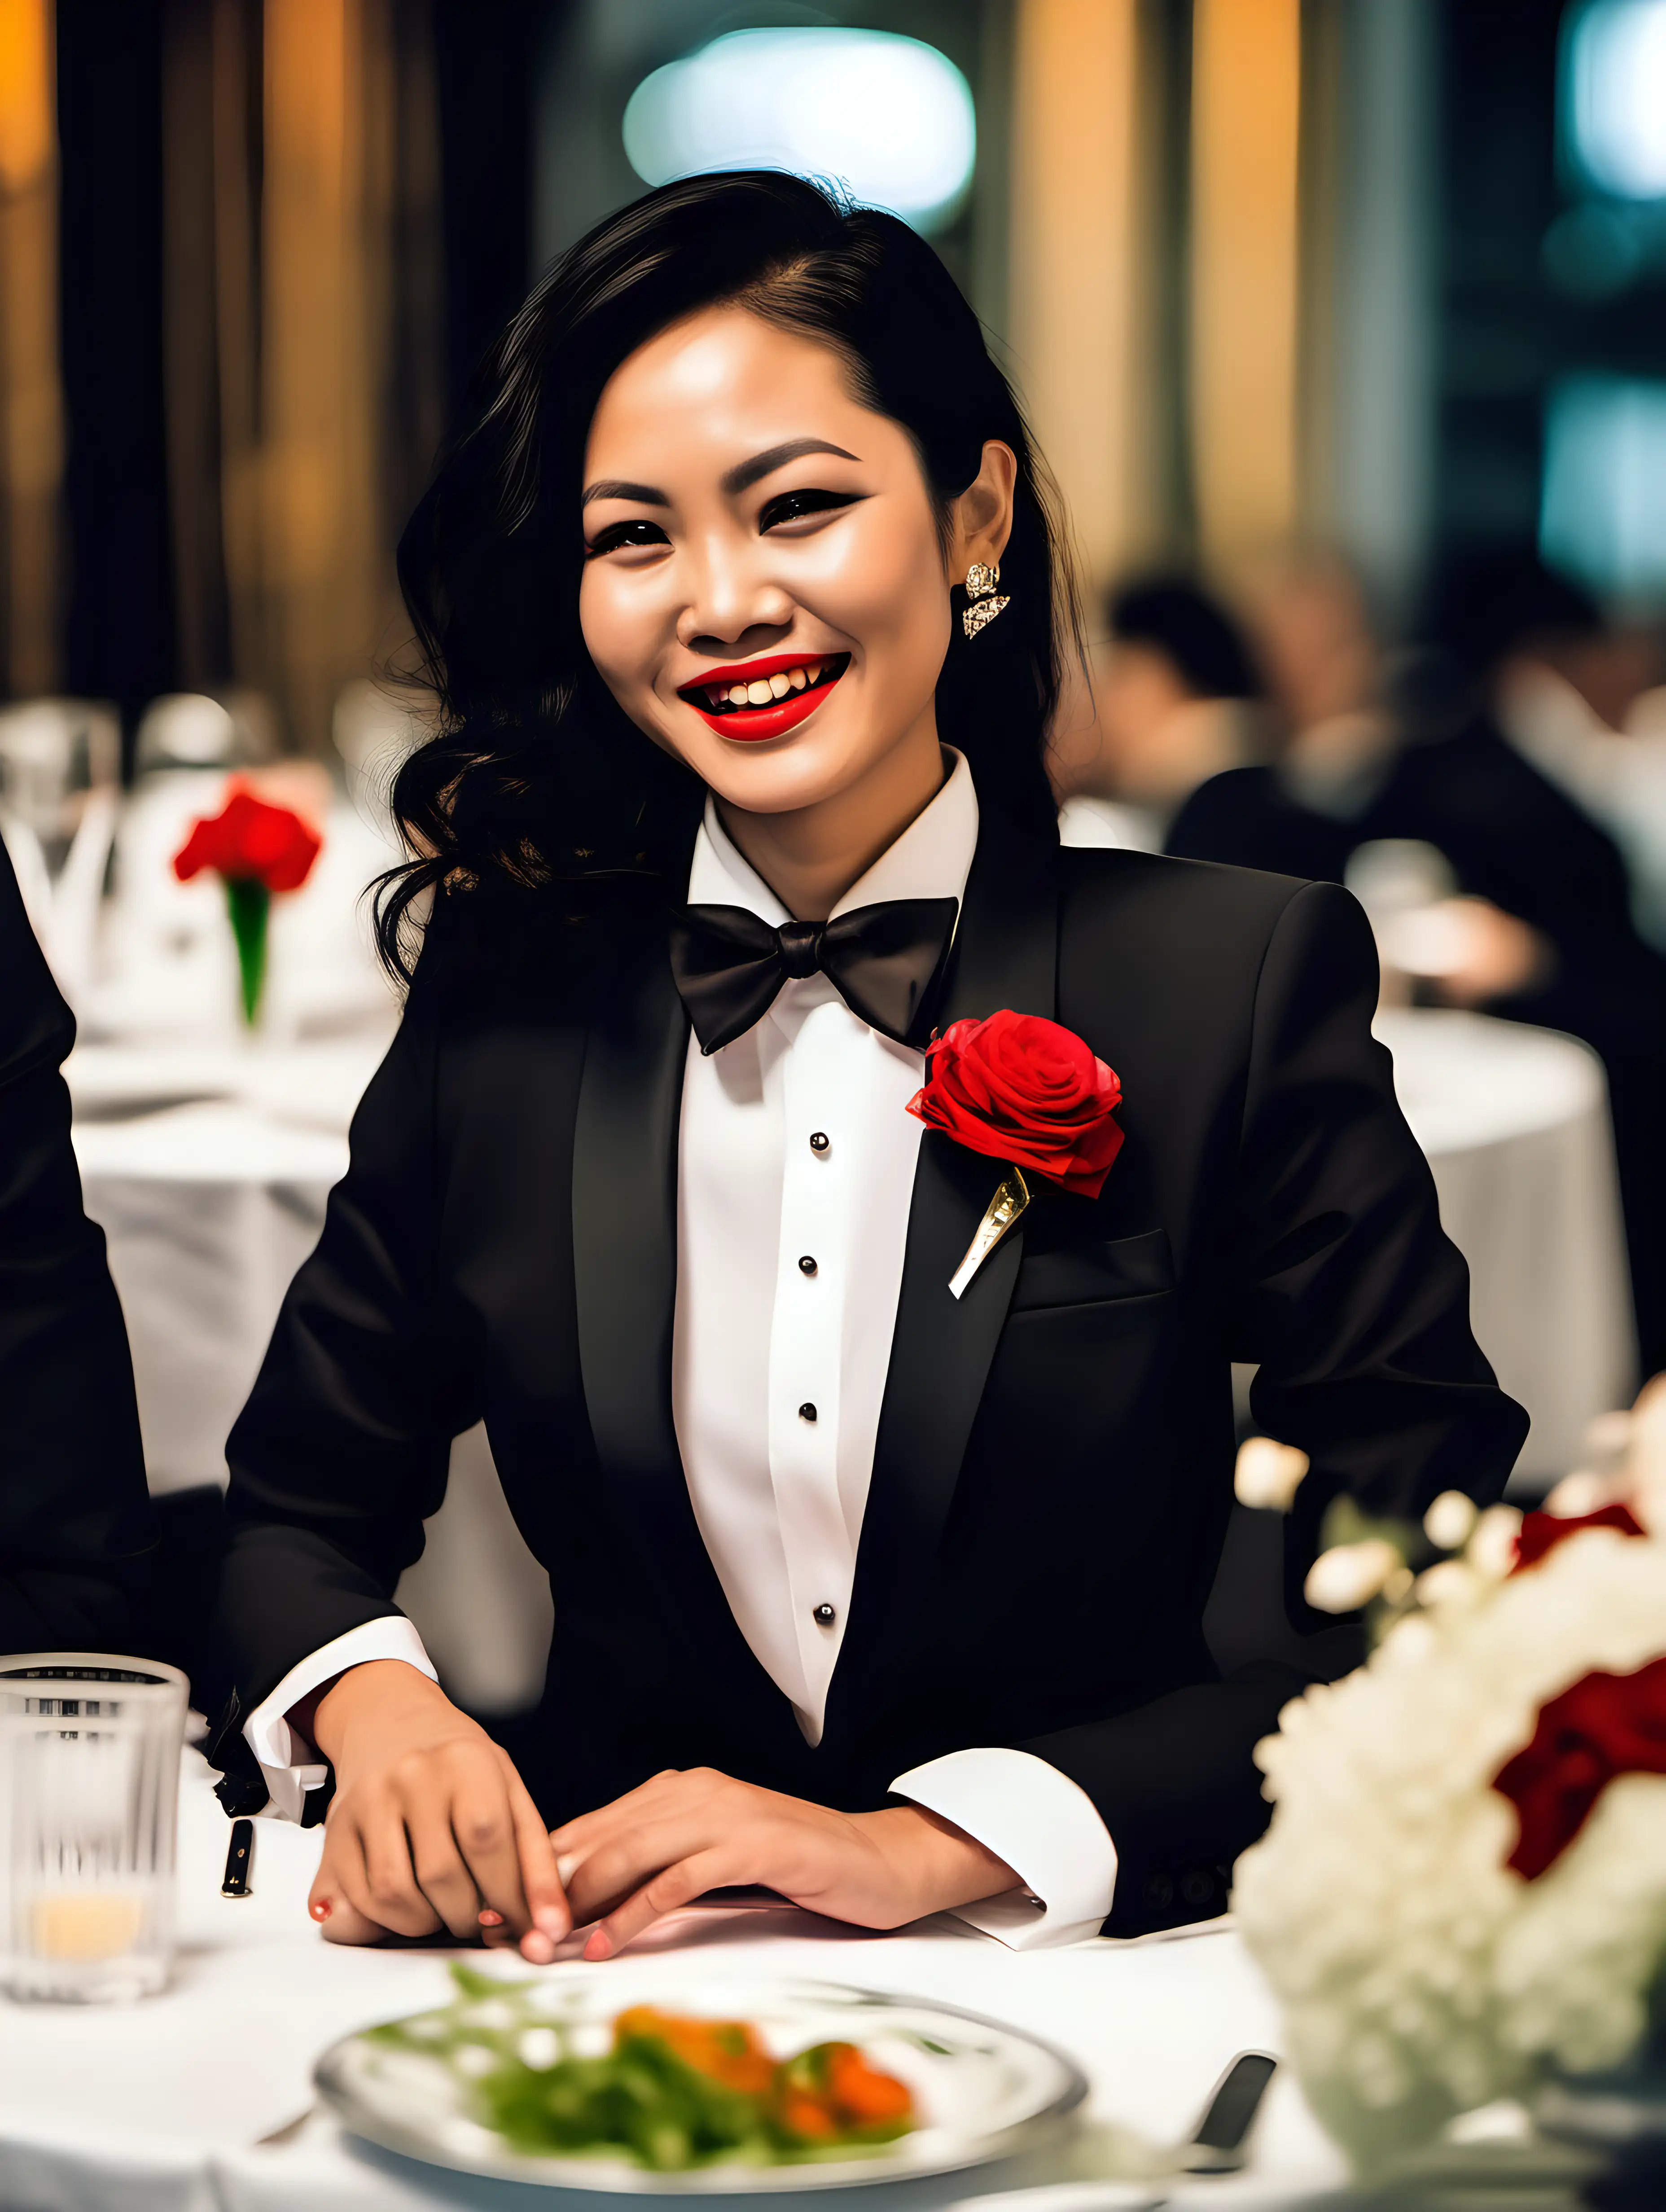 35 year old gorgeous and smiling and laughing Vietnamese woman with black shoulder length hair and red lipstick wearing a formal tuxedo with a black bow tie and studs and black cufflinks. Her jacket has a corsage. She is sitting at a dinner table.